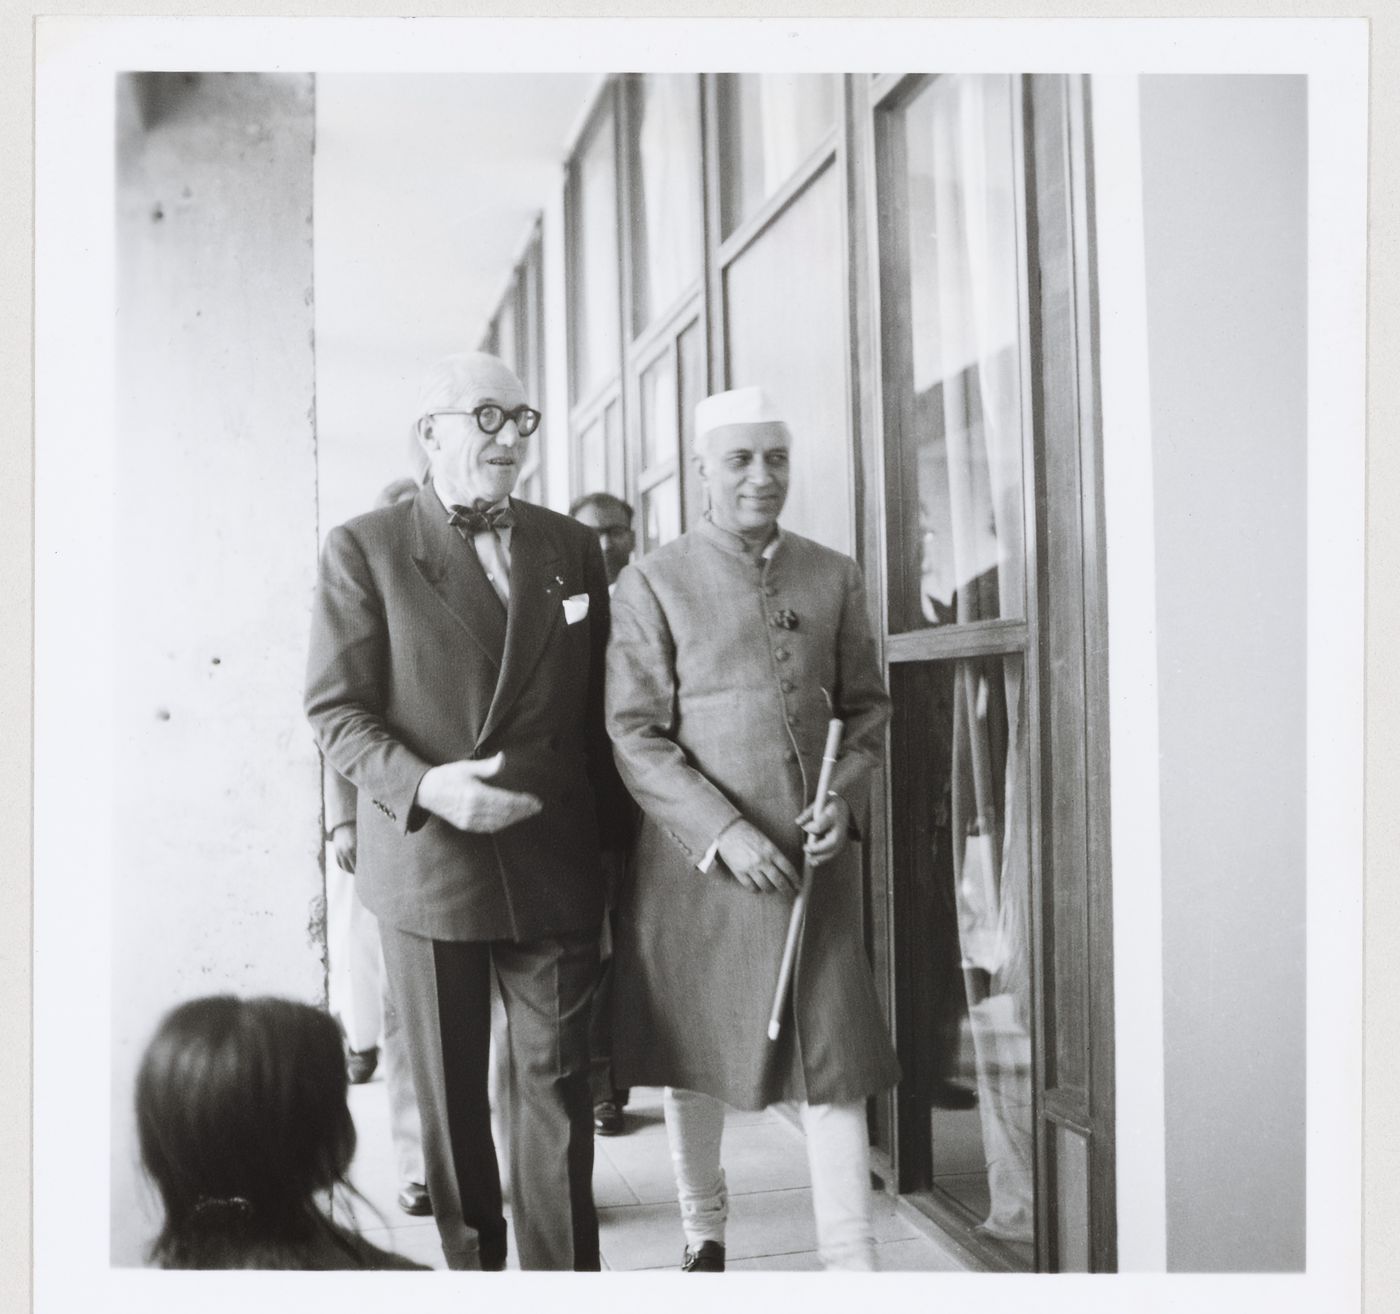 Le Corbusier and Jawaharlal Nehru on the occasion of the inauguration of the High Court Building, Chandigarh, India